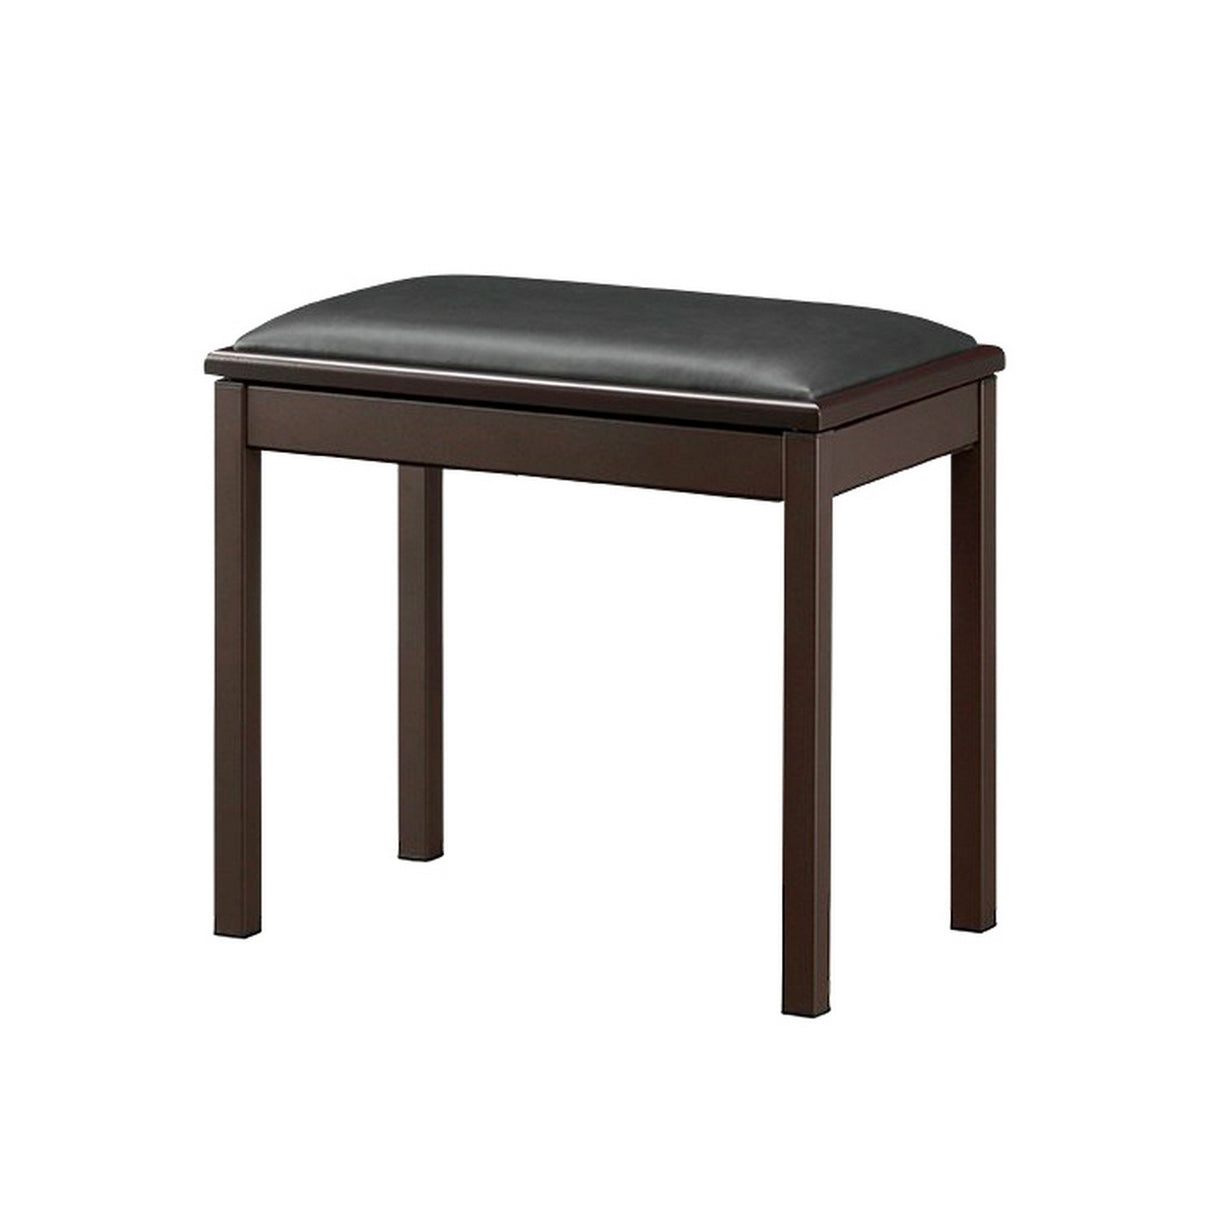 Kawai WB-152 Padded Bench with Wooden Frame Seat, Rosewood